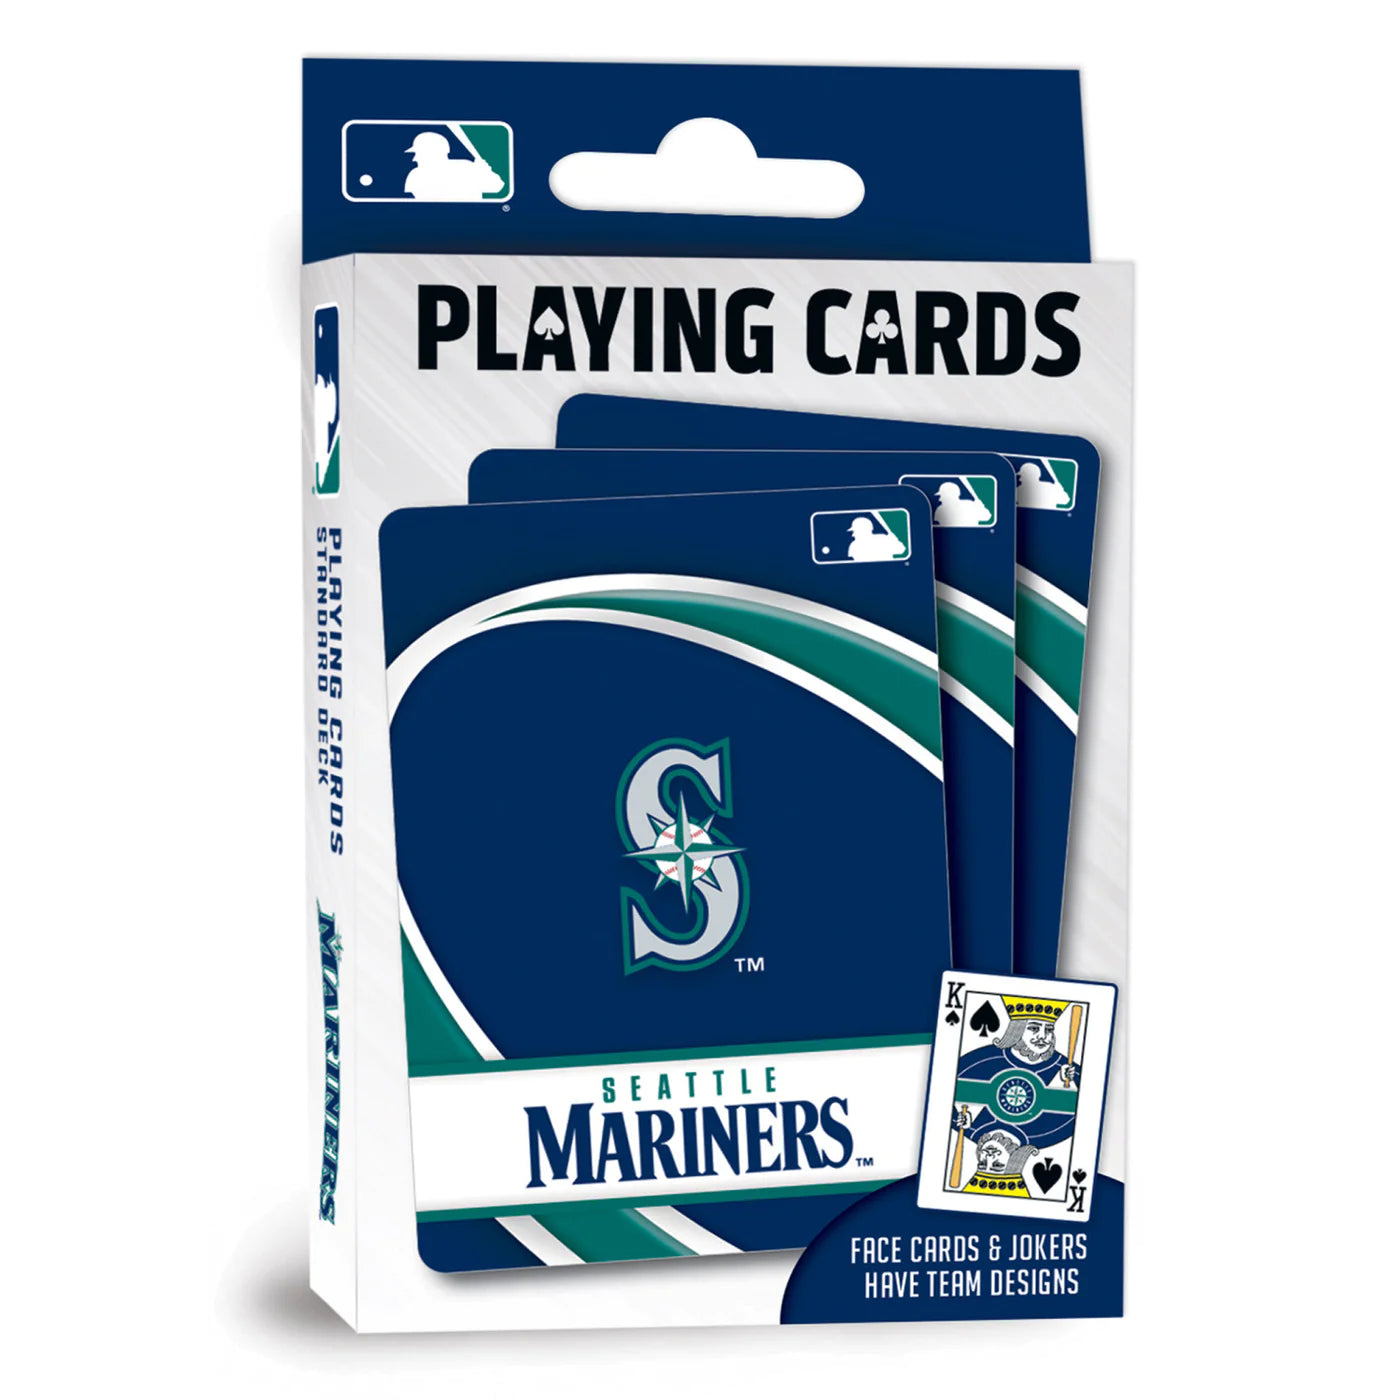 Seattle Mariners Playing Cards by Masterpieces